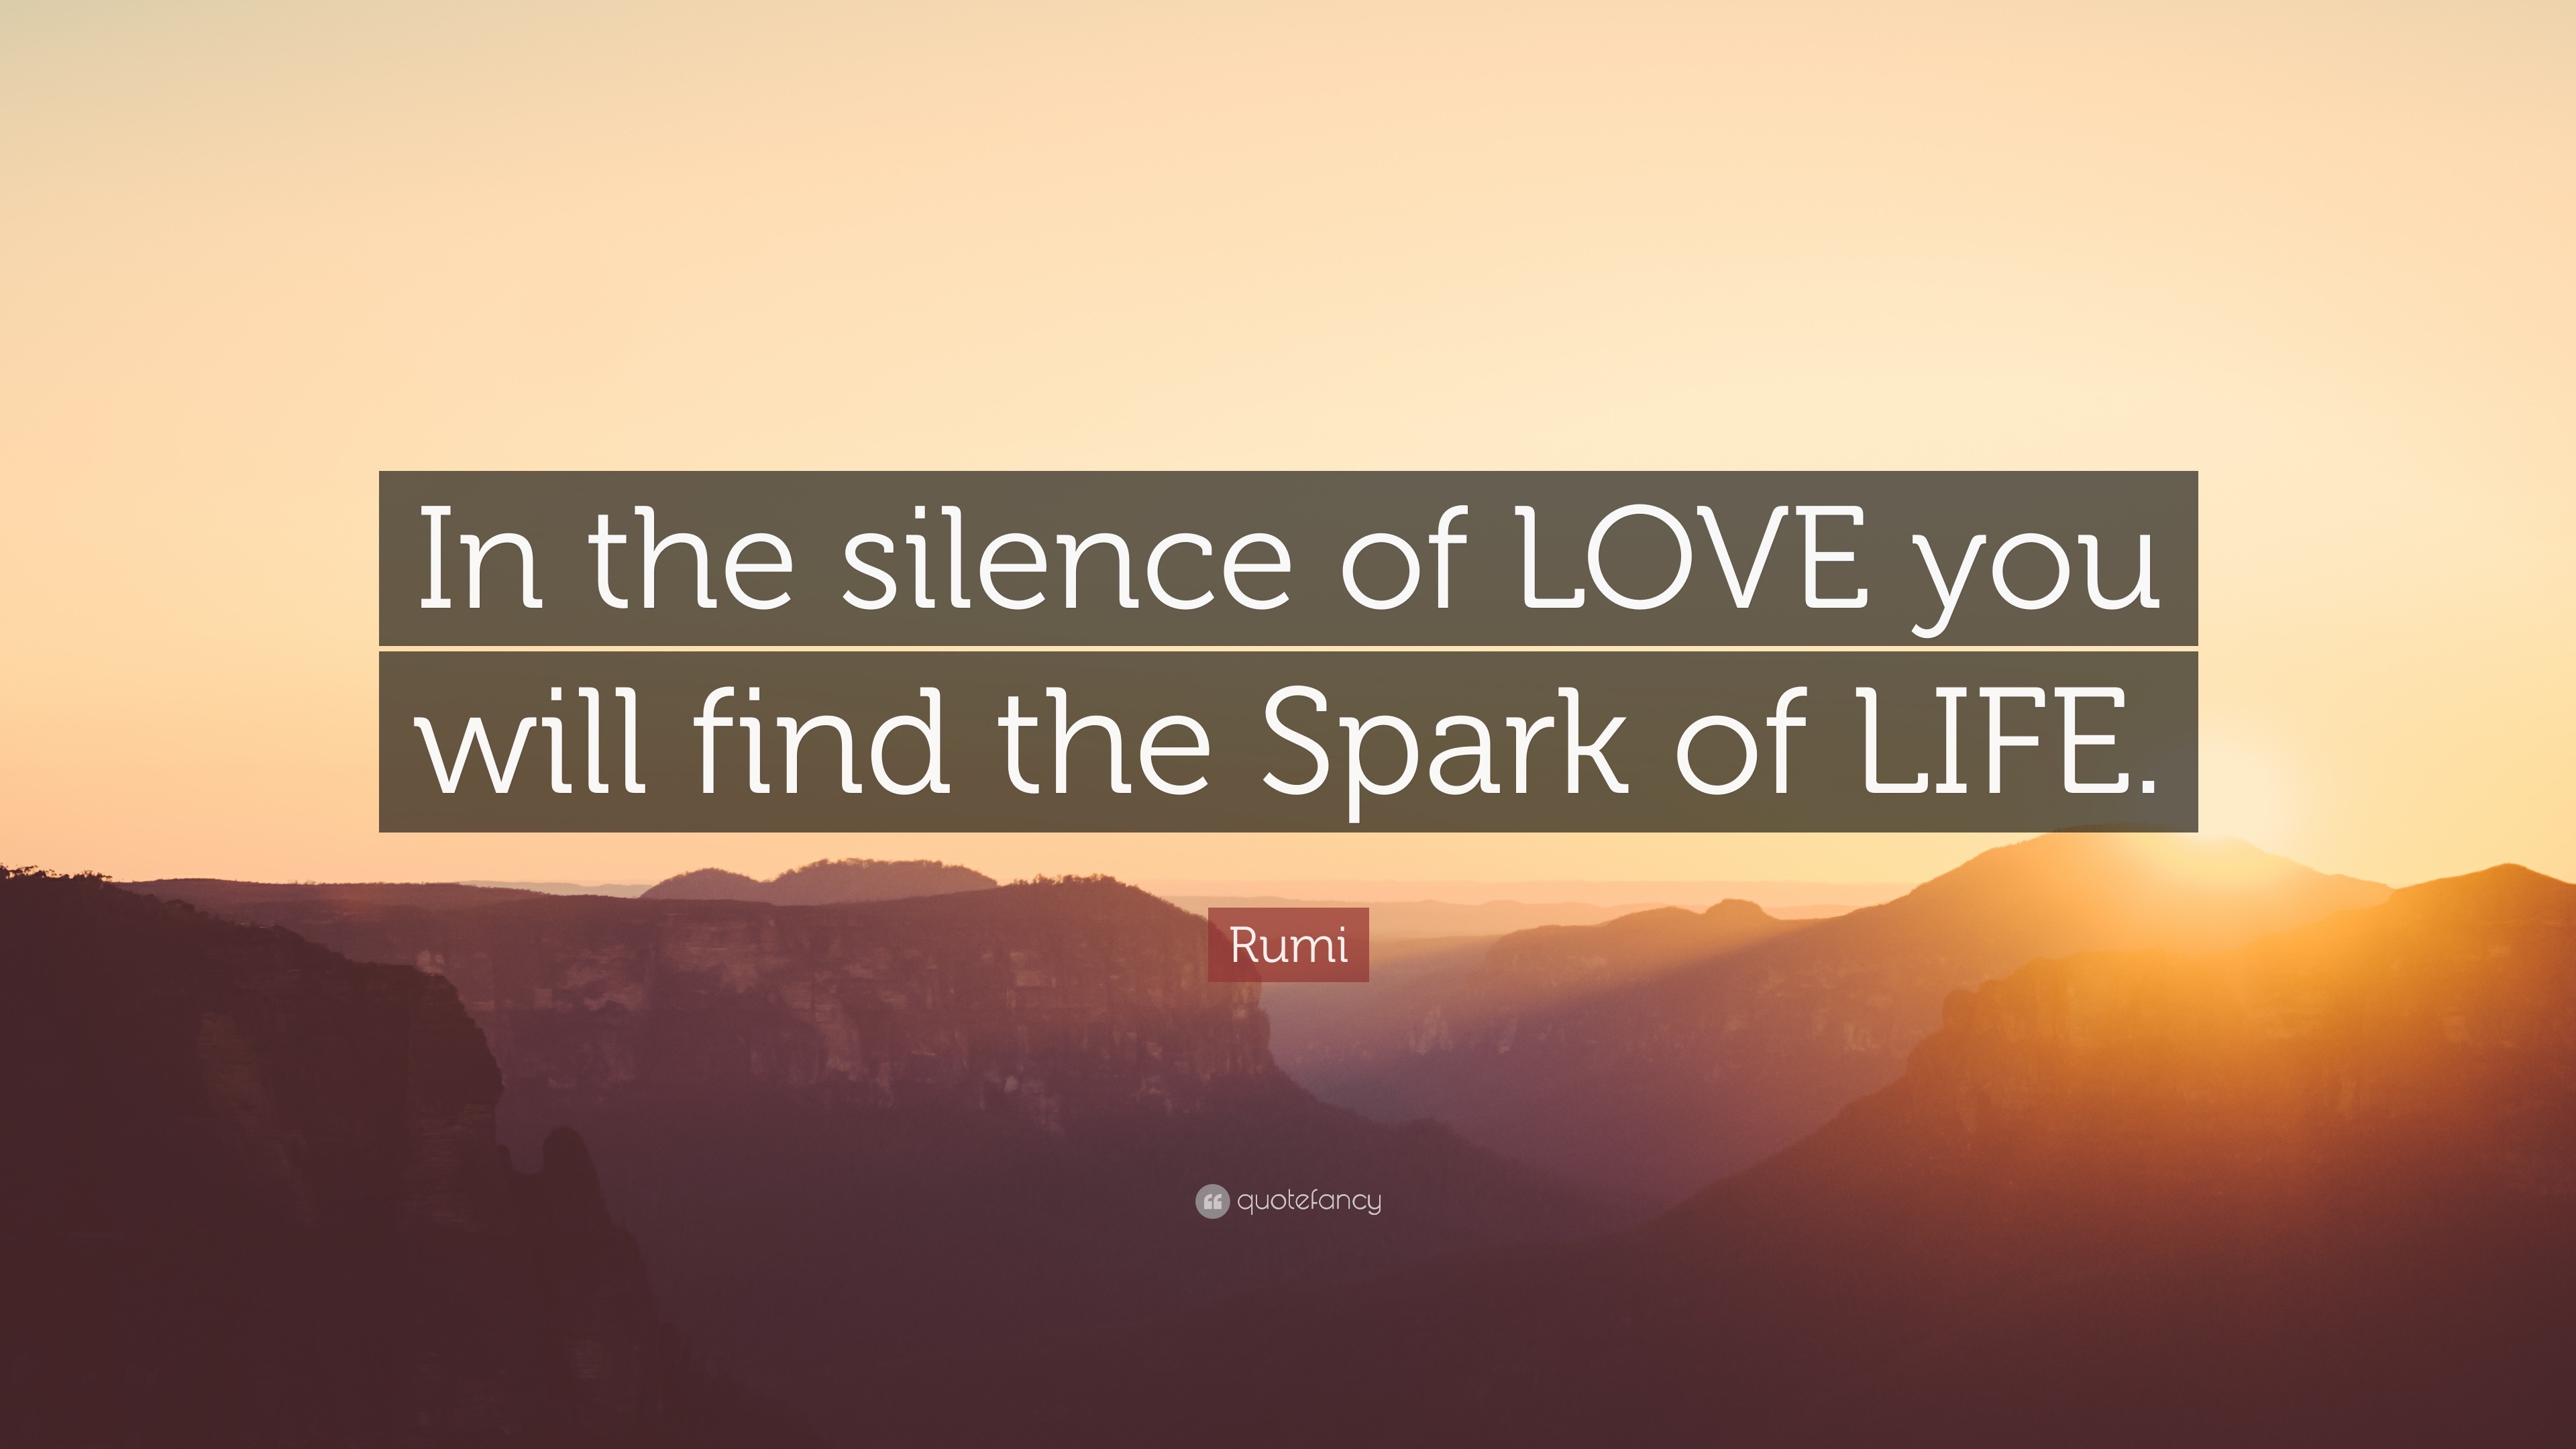 Rumi Quote “In the silence of LOVE you will find the Spark of LIFE